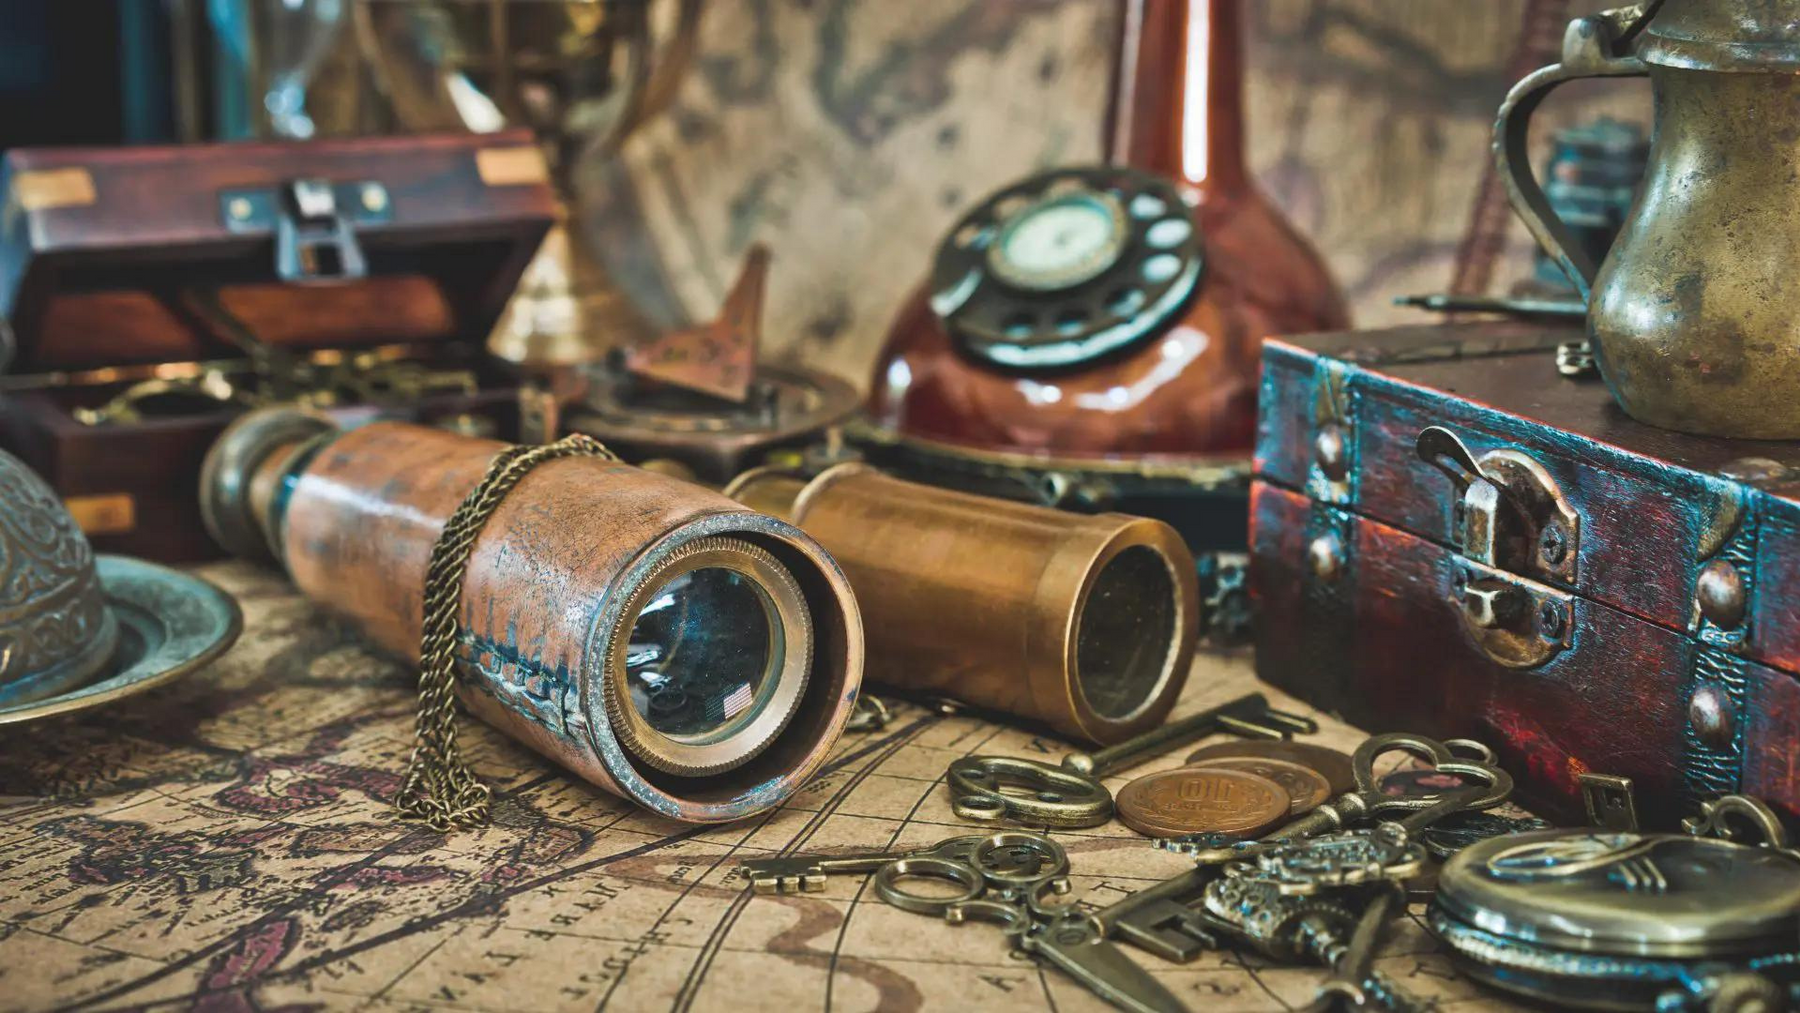 Antique Buying Trends For The Future